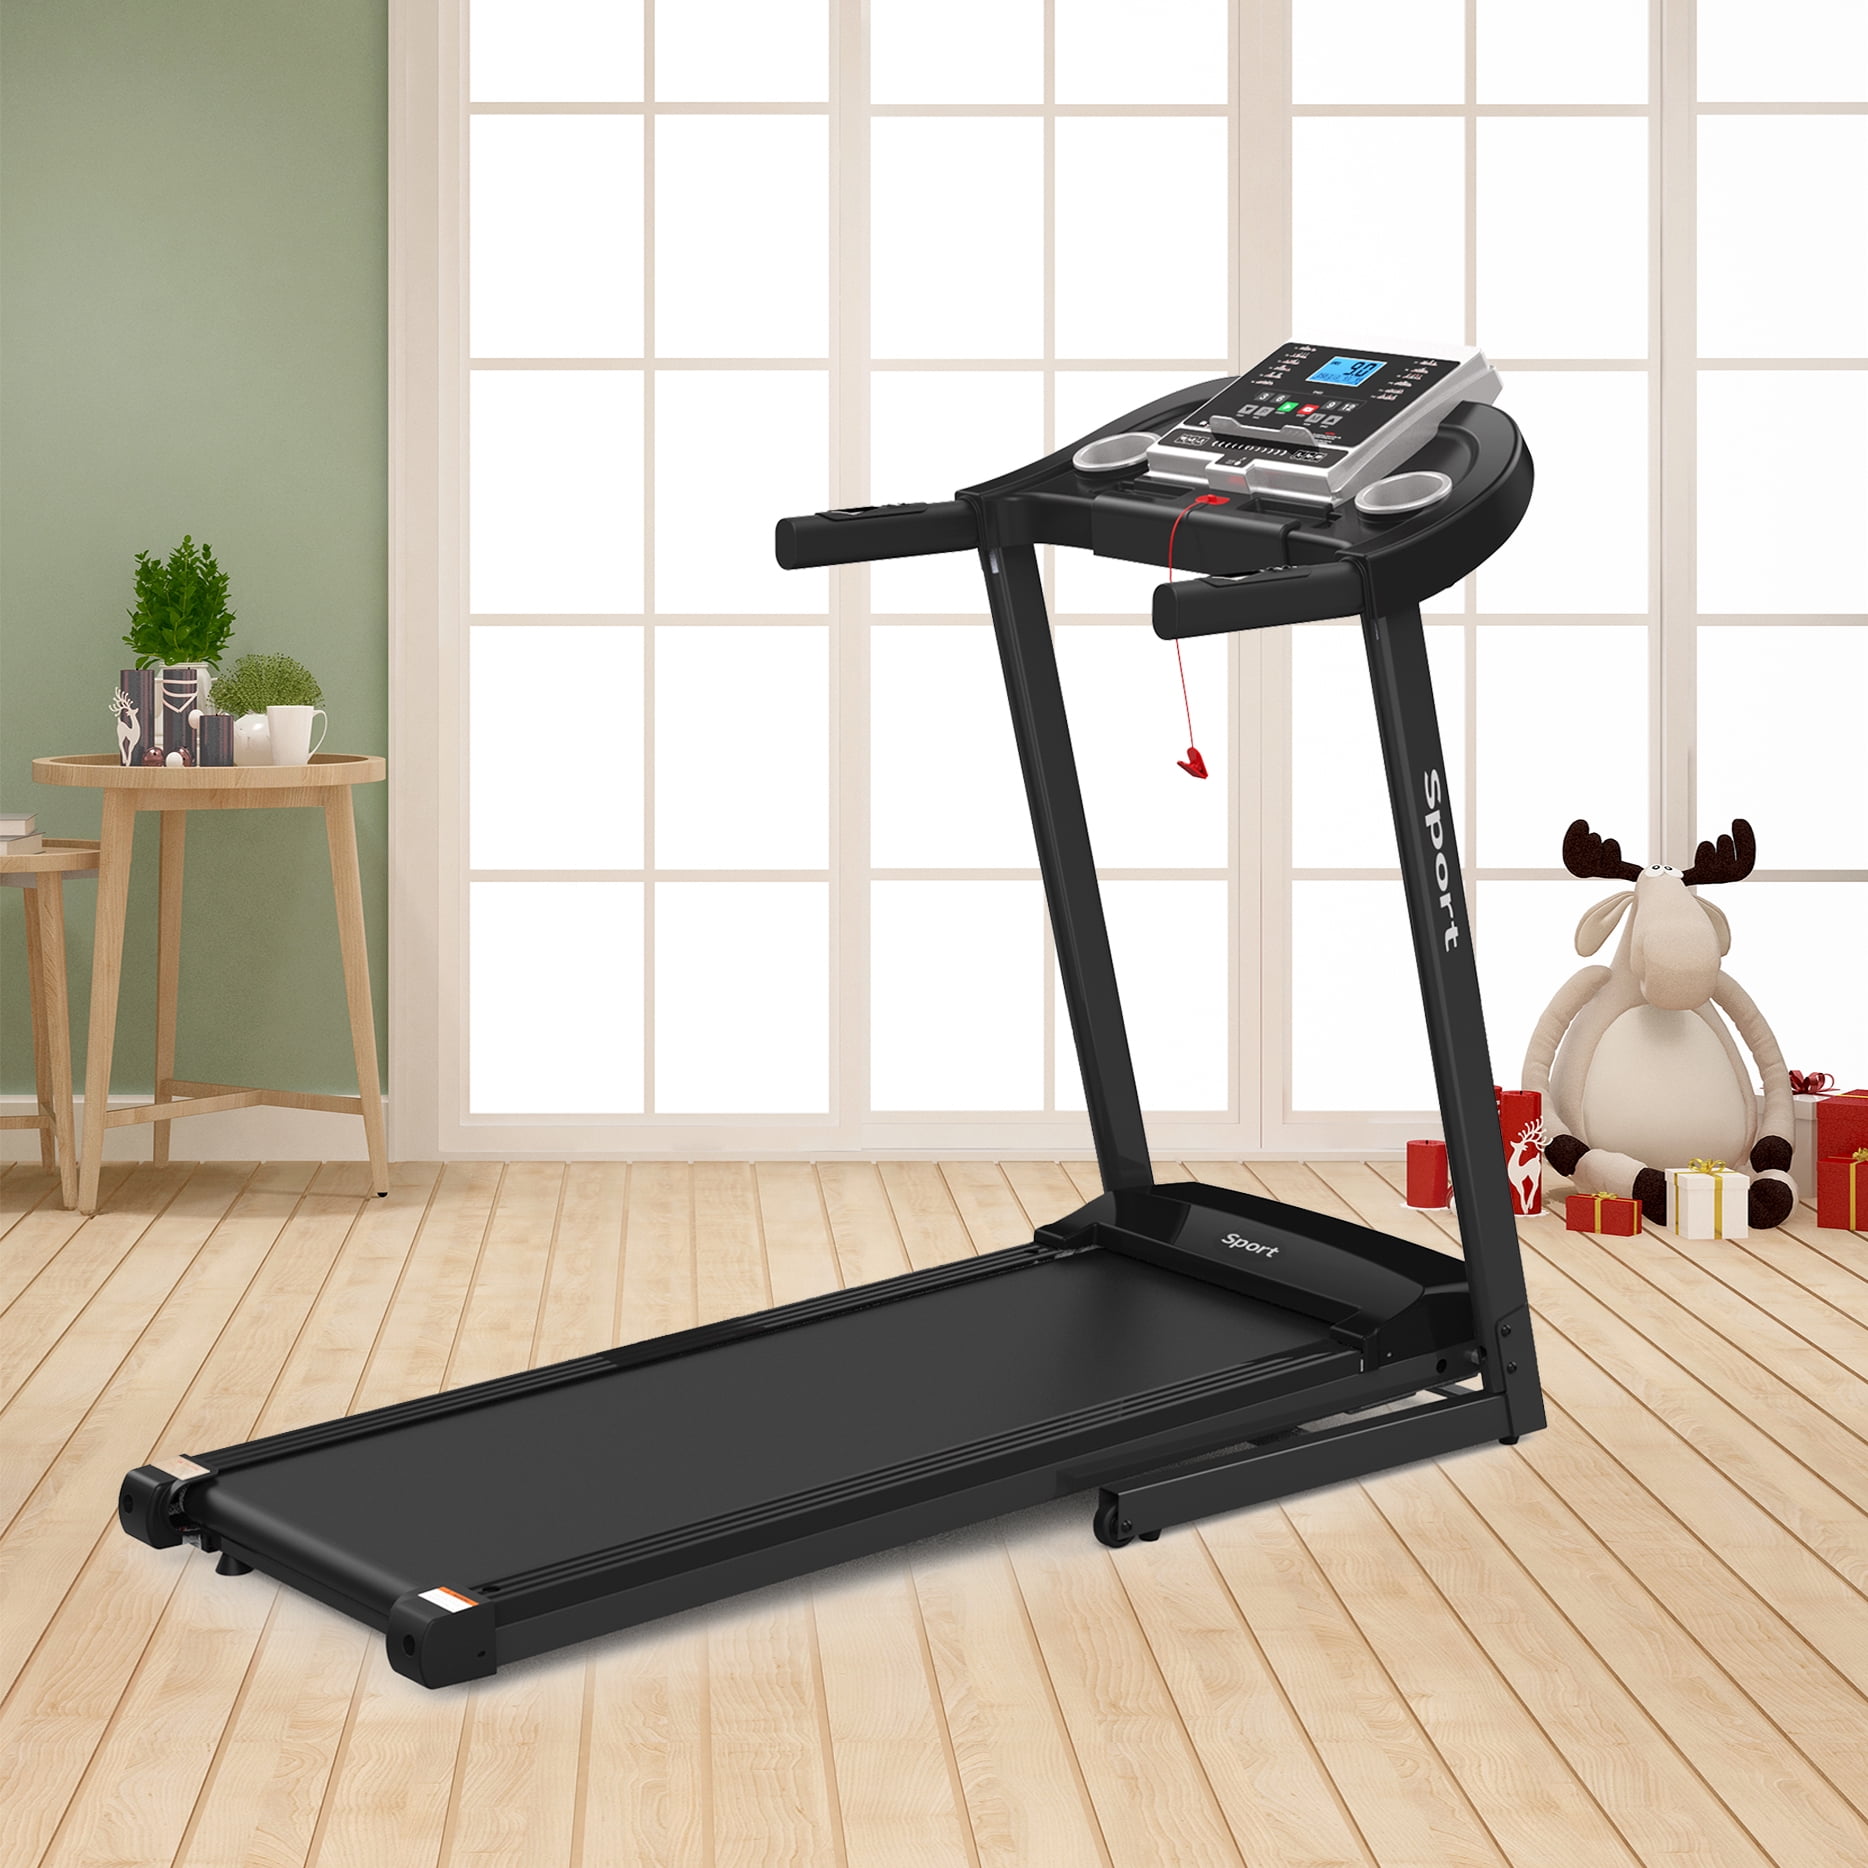 Details about   Folding Treadmill Electric Running Machine Auto Stop Safety Function 2.0HP Motor 